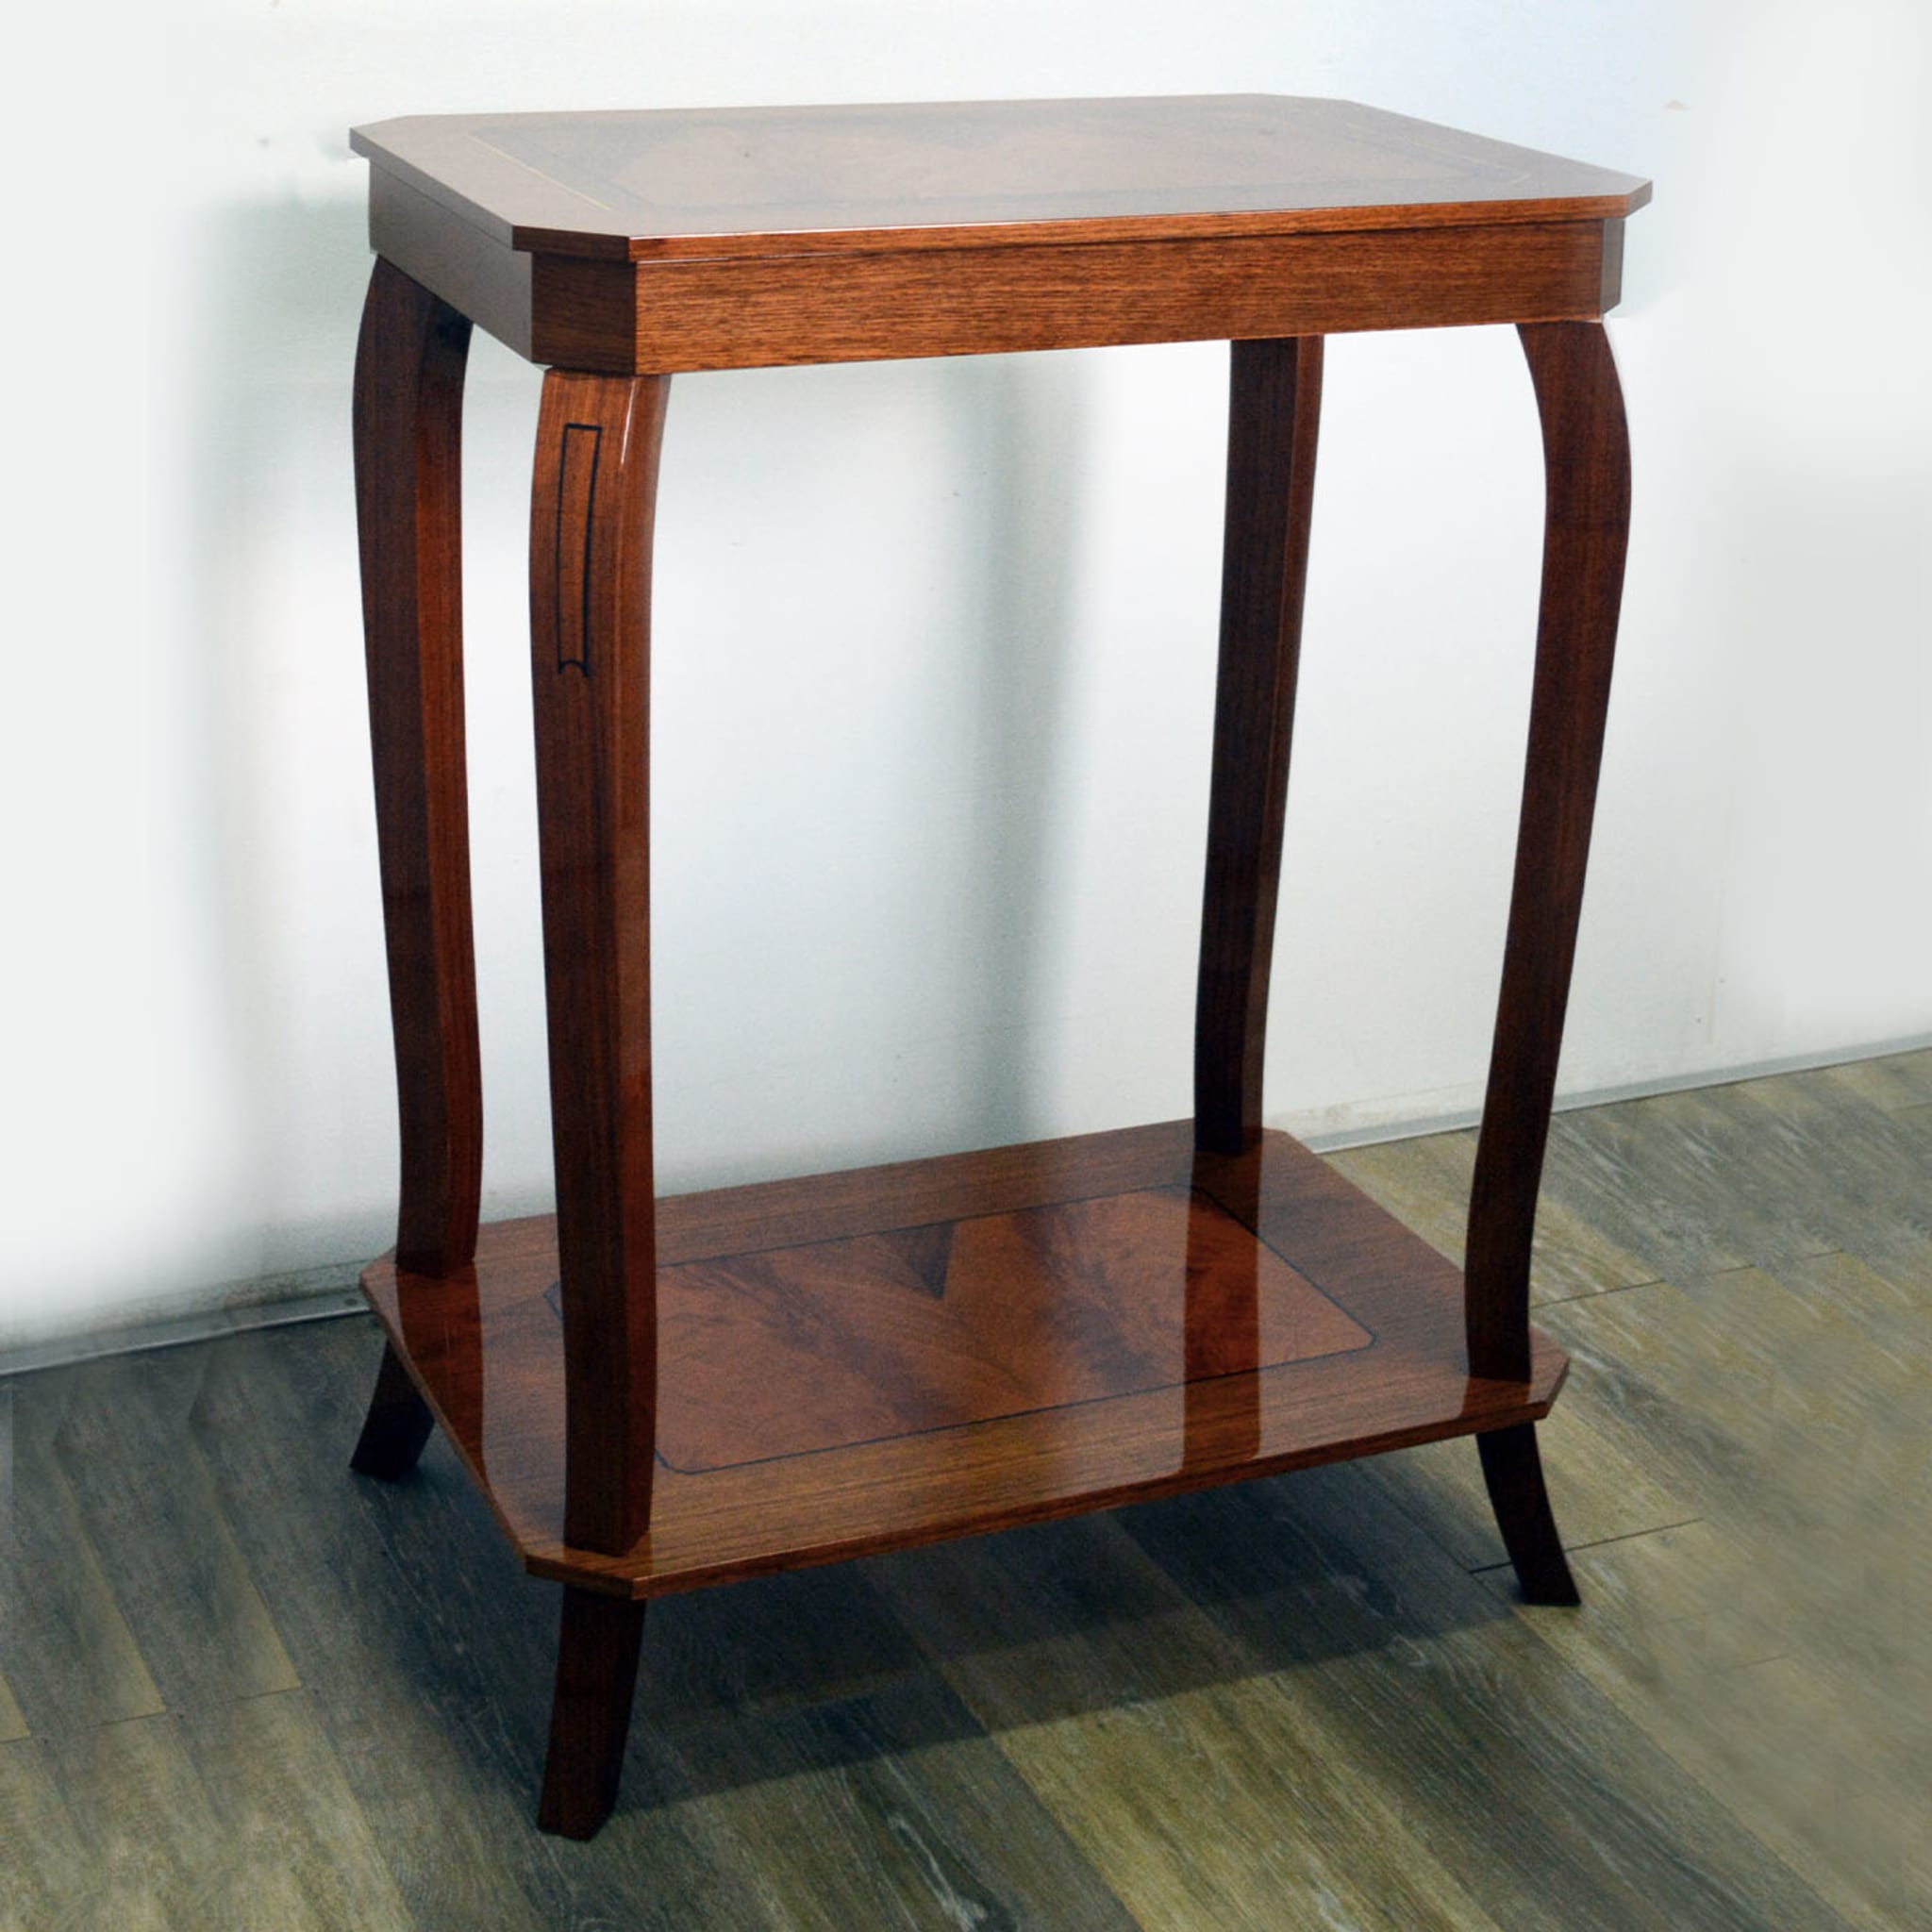 Musical Walnut Side Table with Storage Unit - Alternative view 5